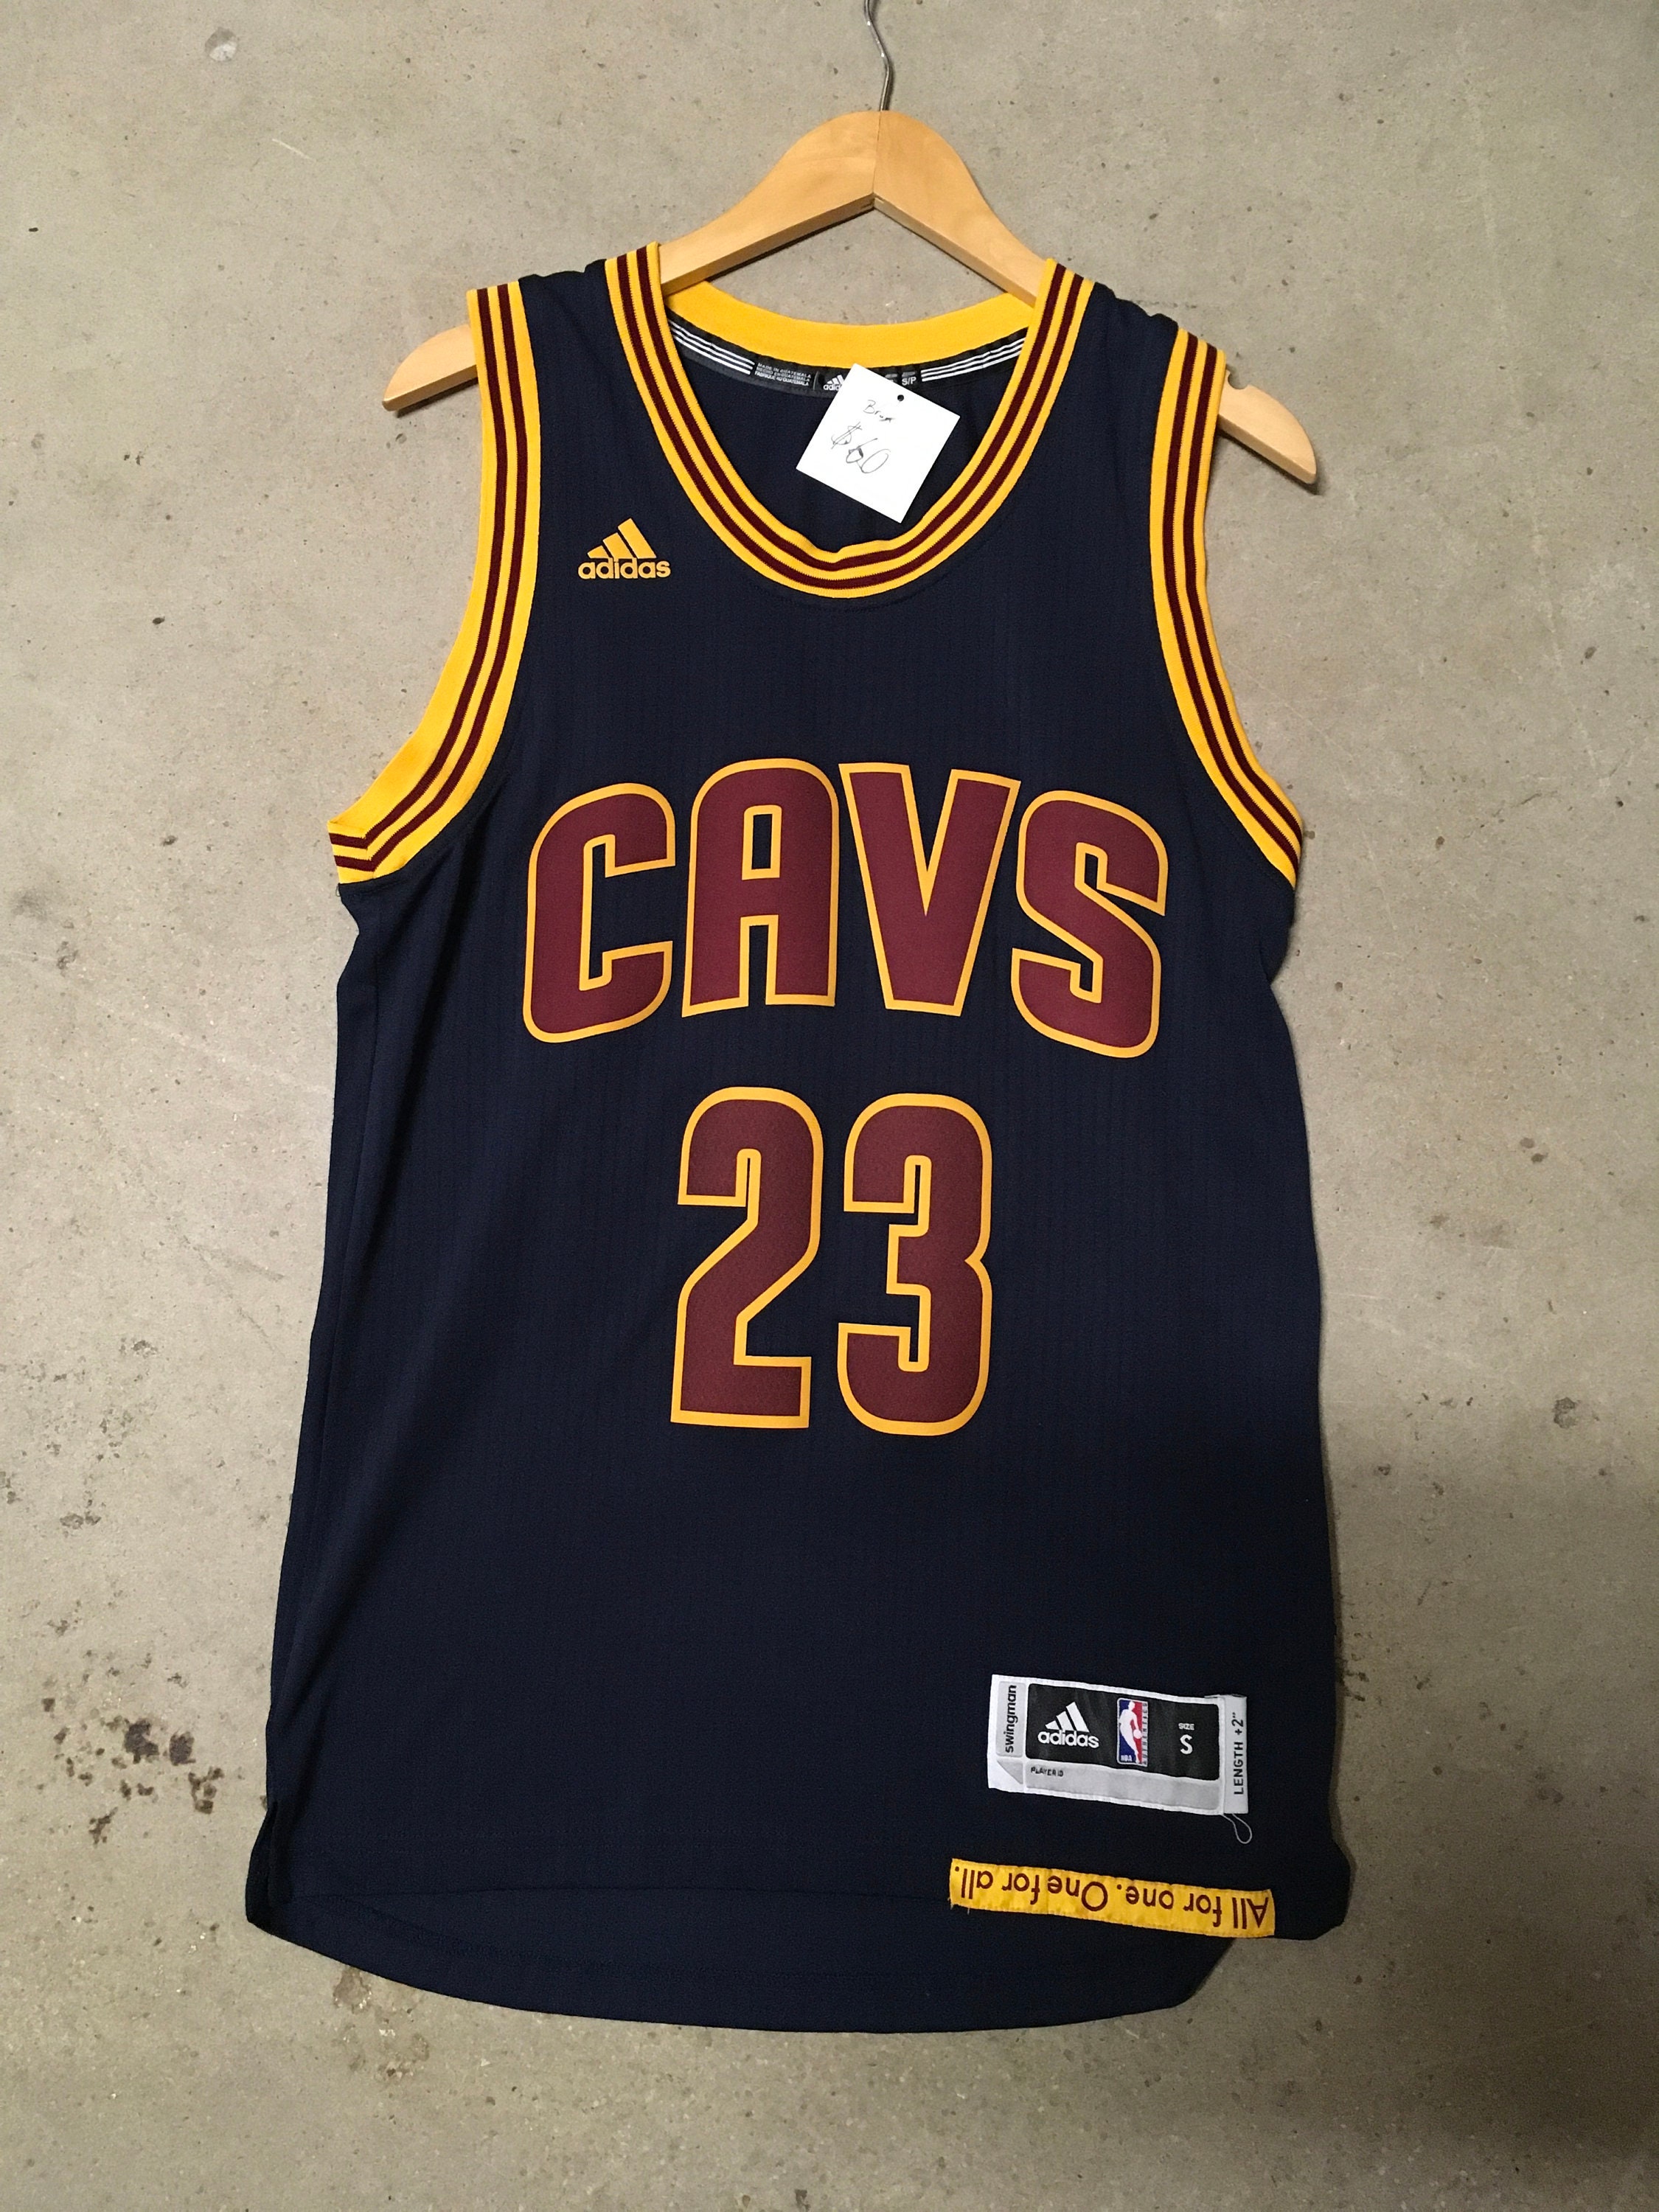 LeBron James #23 Cleveland Cavaliers Cavs adidas NBA Jersey Toddler L 7  Rookie